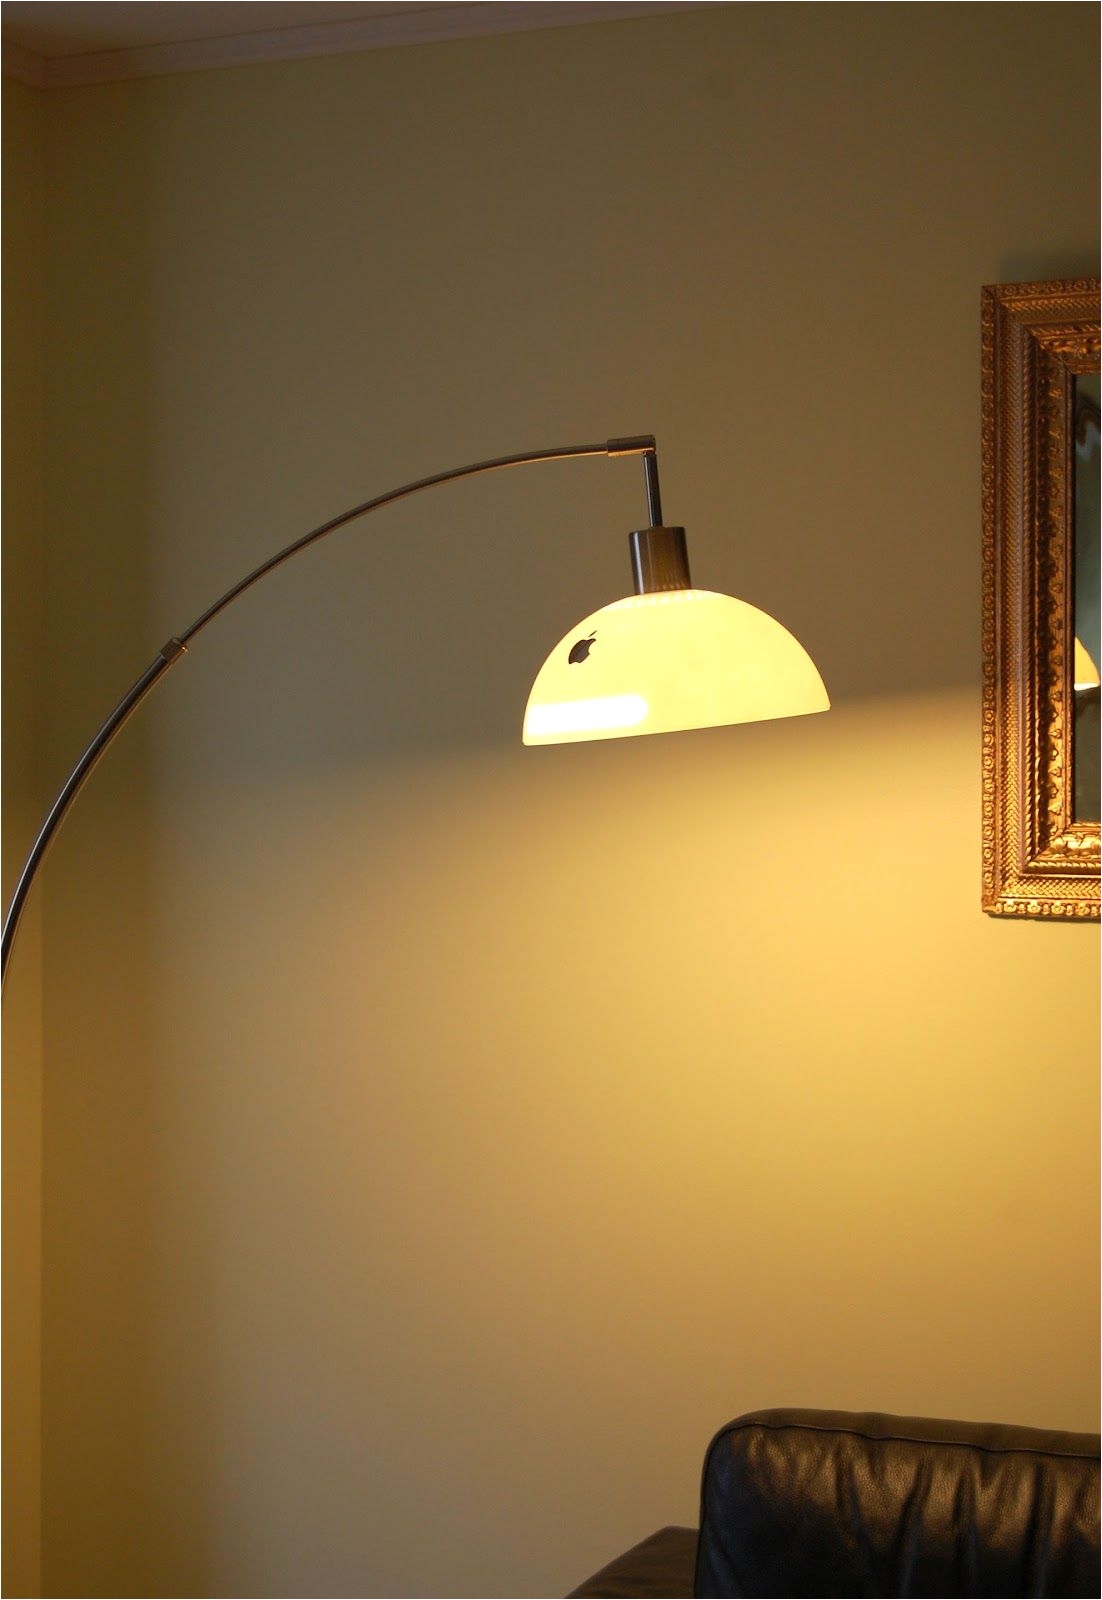 imac g4 upcycled into arc lamp by upcycle us